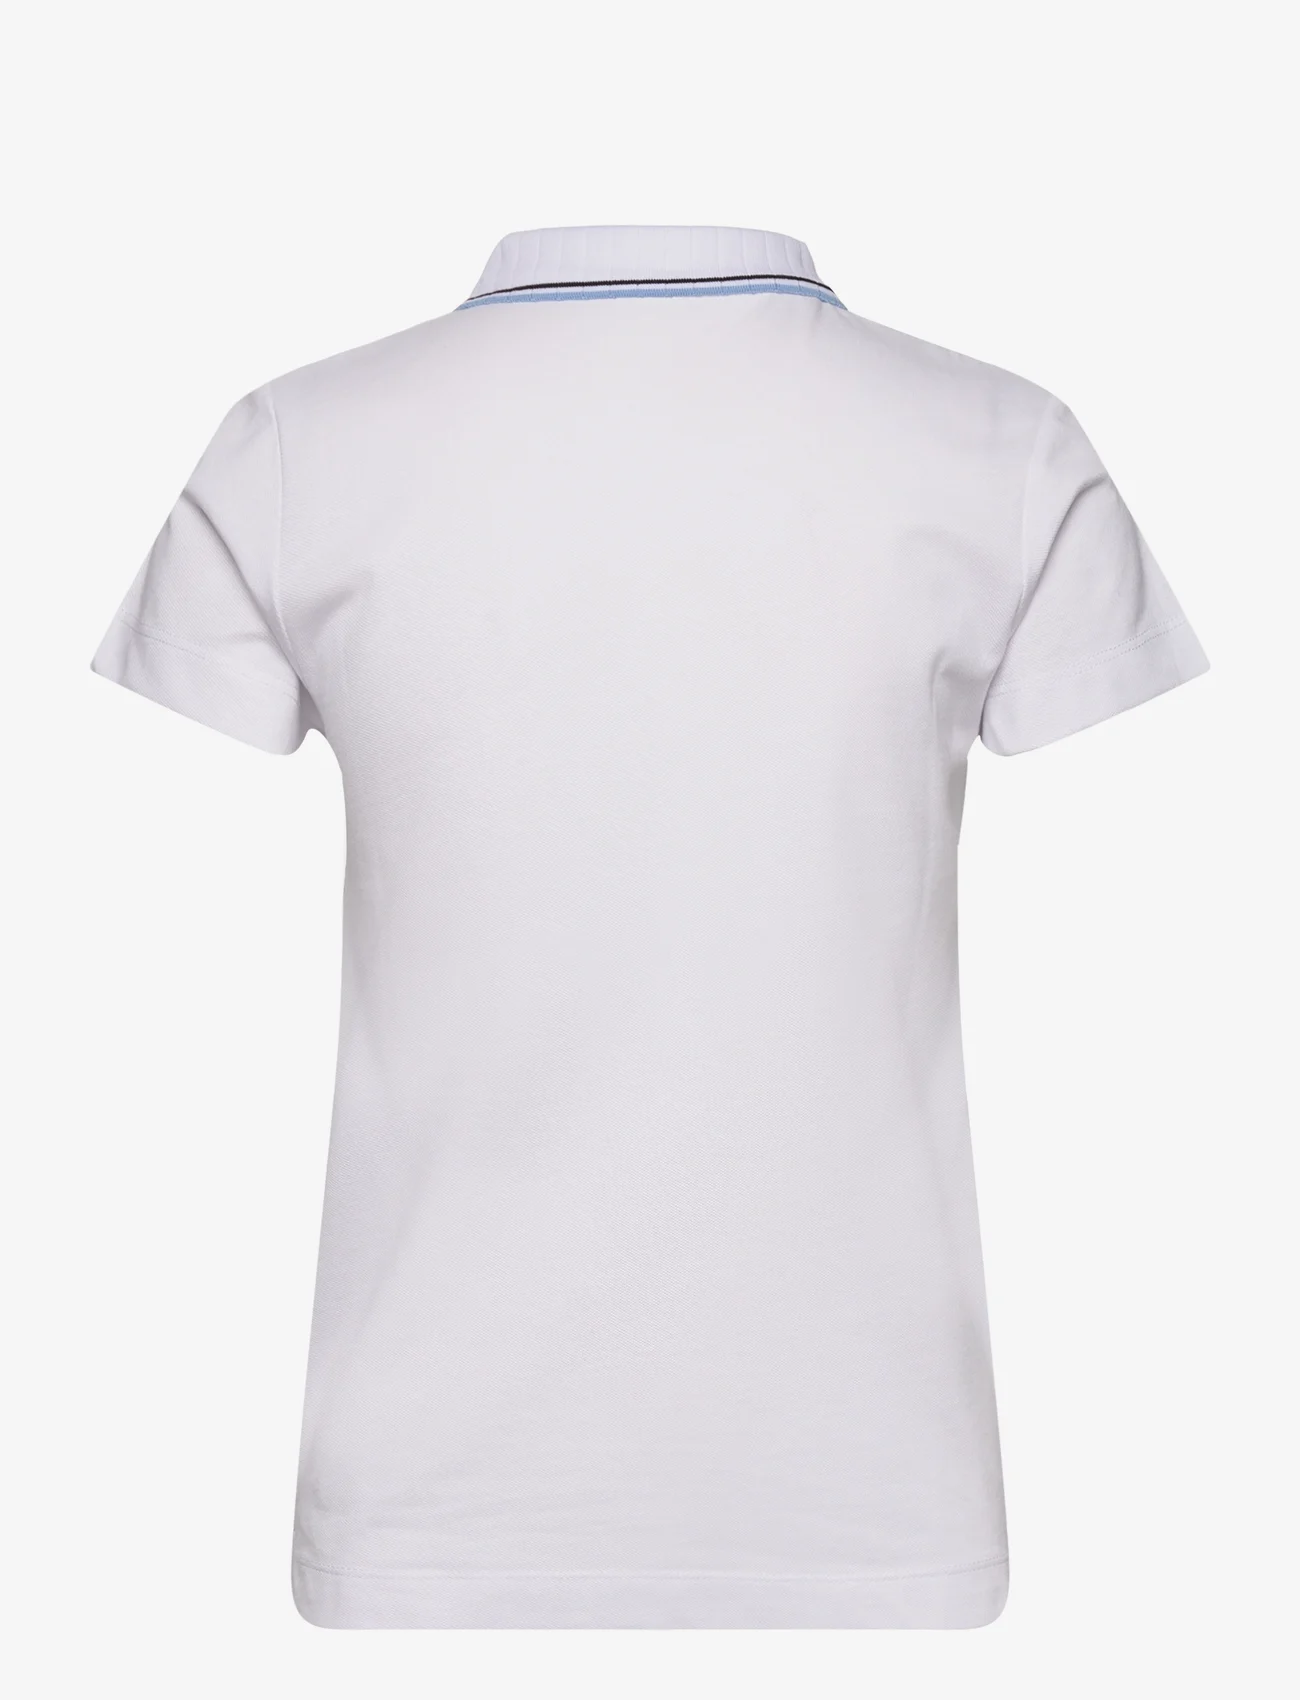 Daily Sports - CANDY CAPS POLO SHIRT - pikéer - white - 1